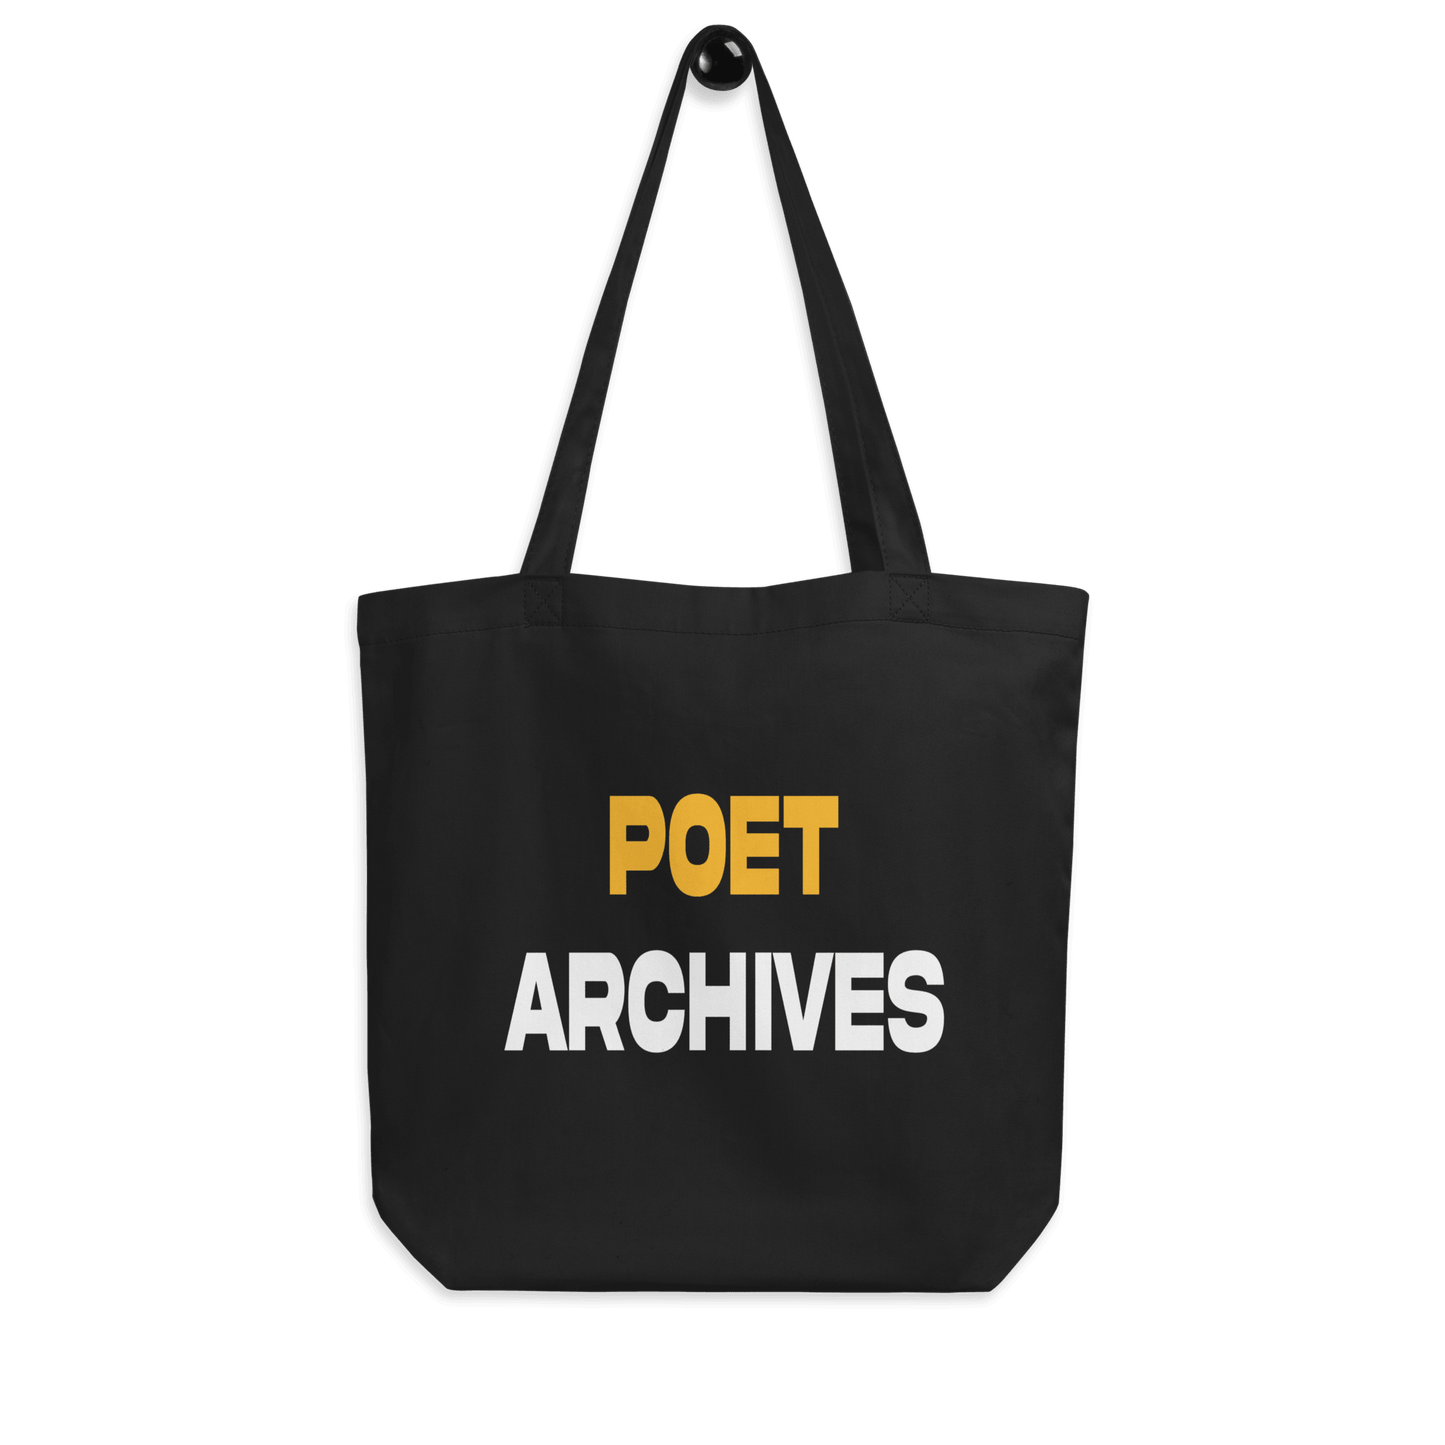 Find Your Meaning double sided tote bag